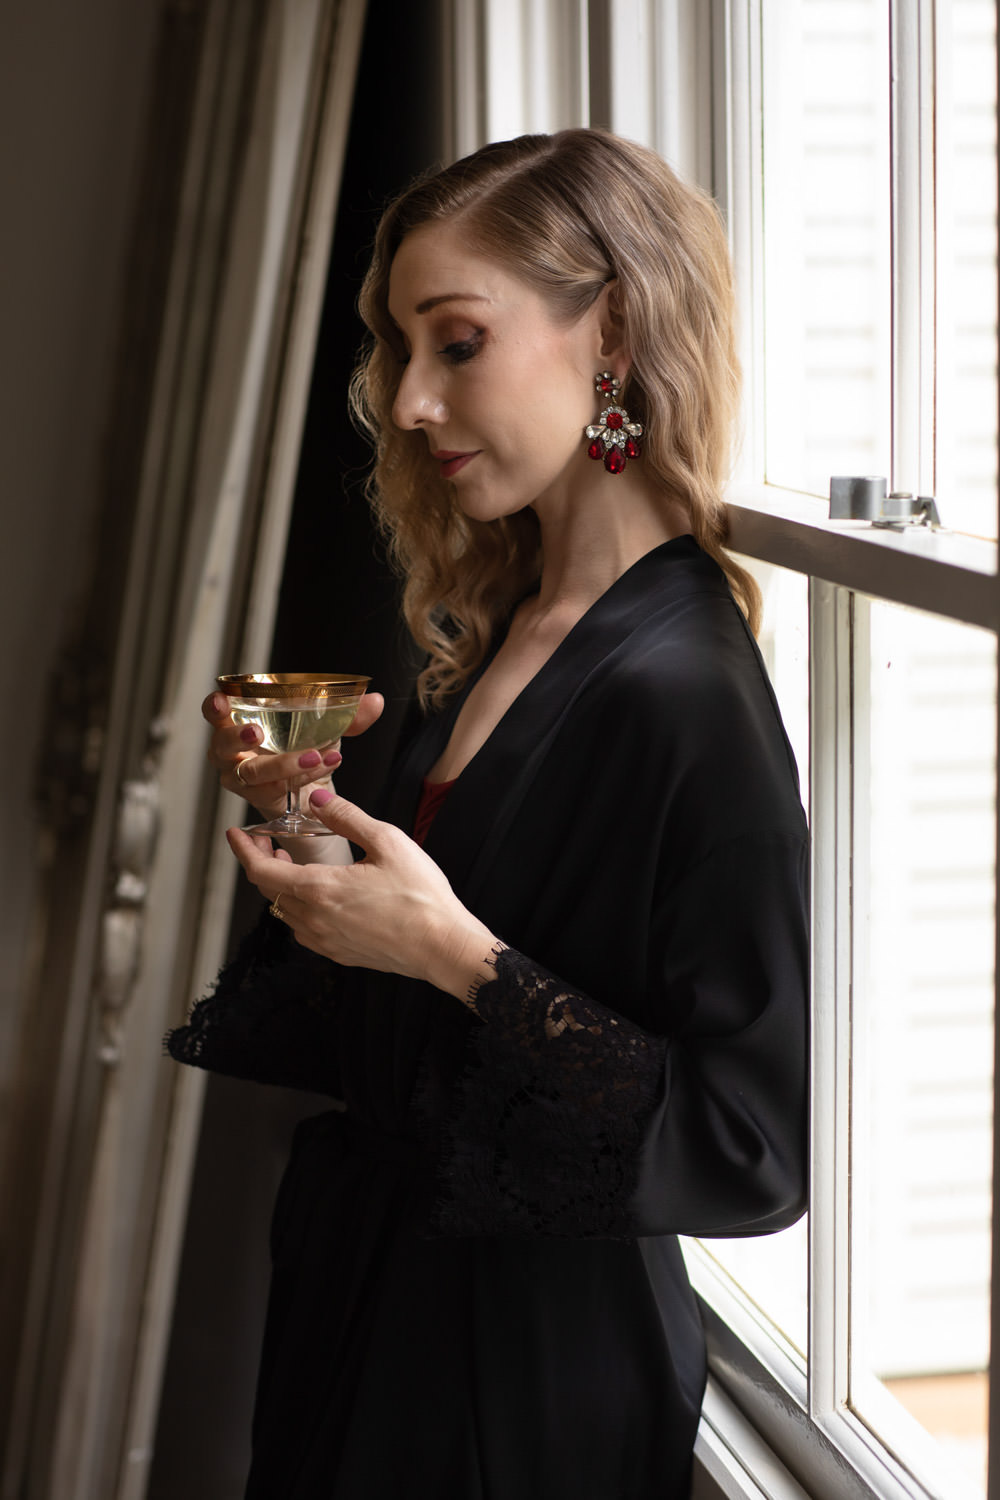 George-wu-robe-collection-launch-holding-champagne-thoughtful-small-business-photography-quinceandmulberrystudios